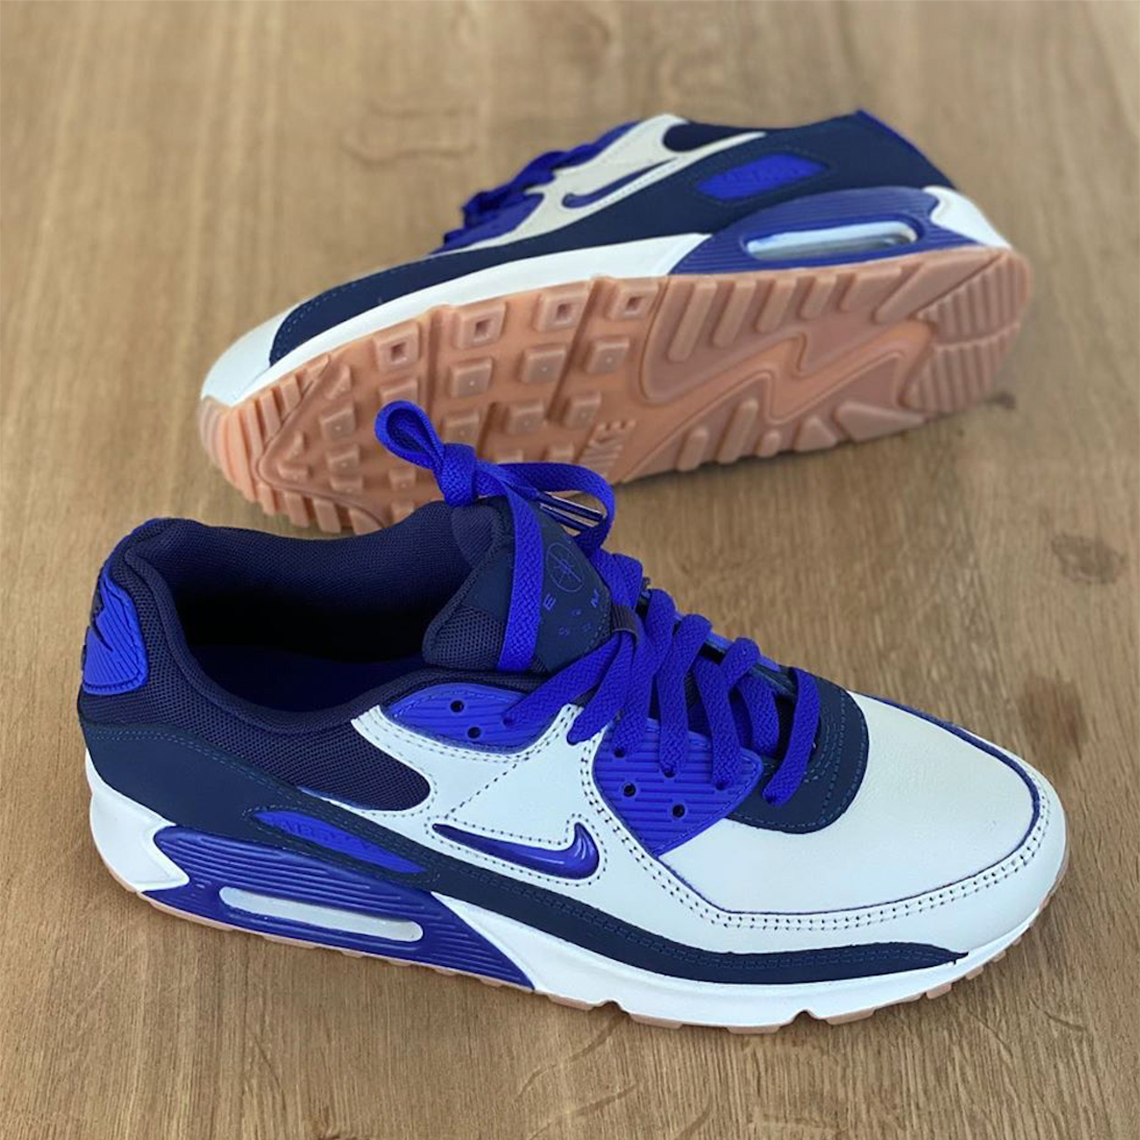 Nike Air Max 90 Home And Away Release Info | SneakerNews.com